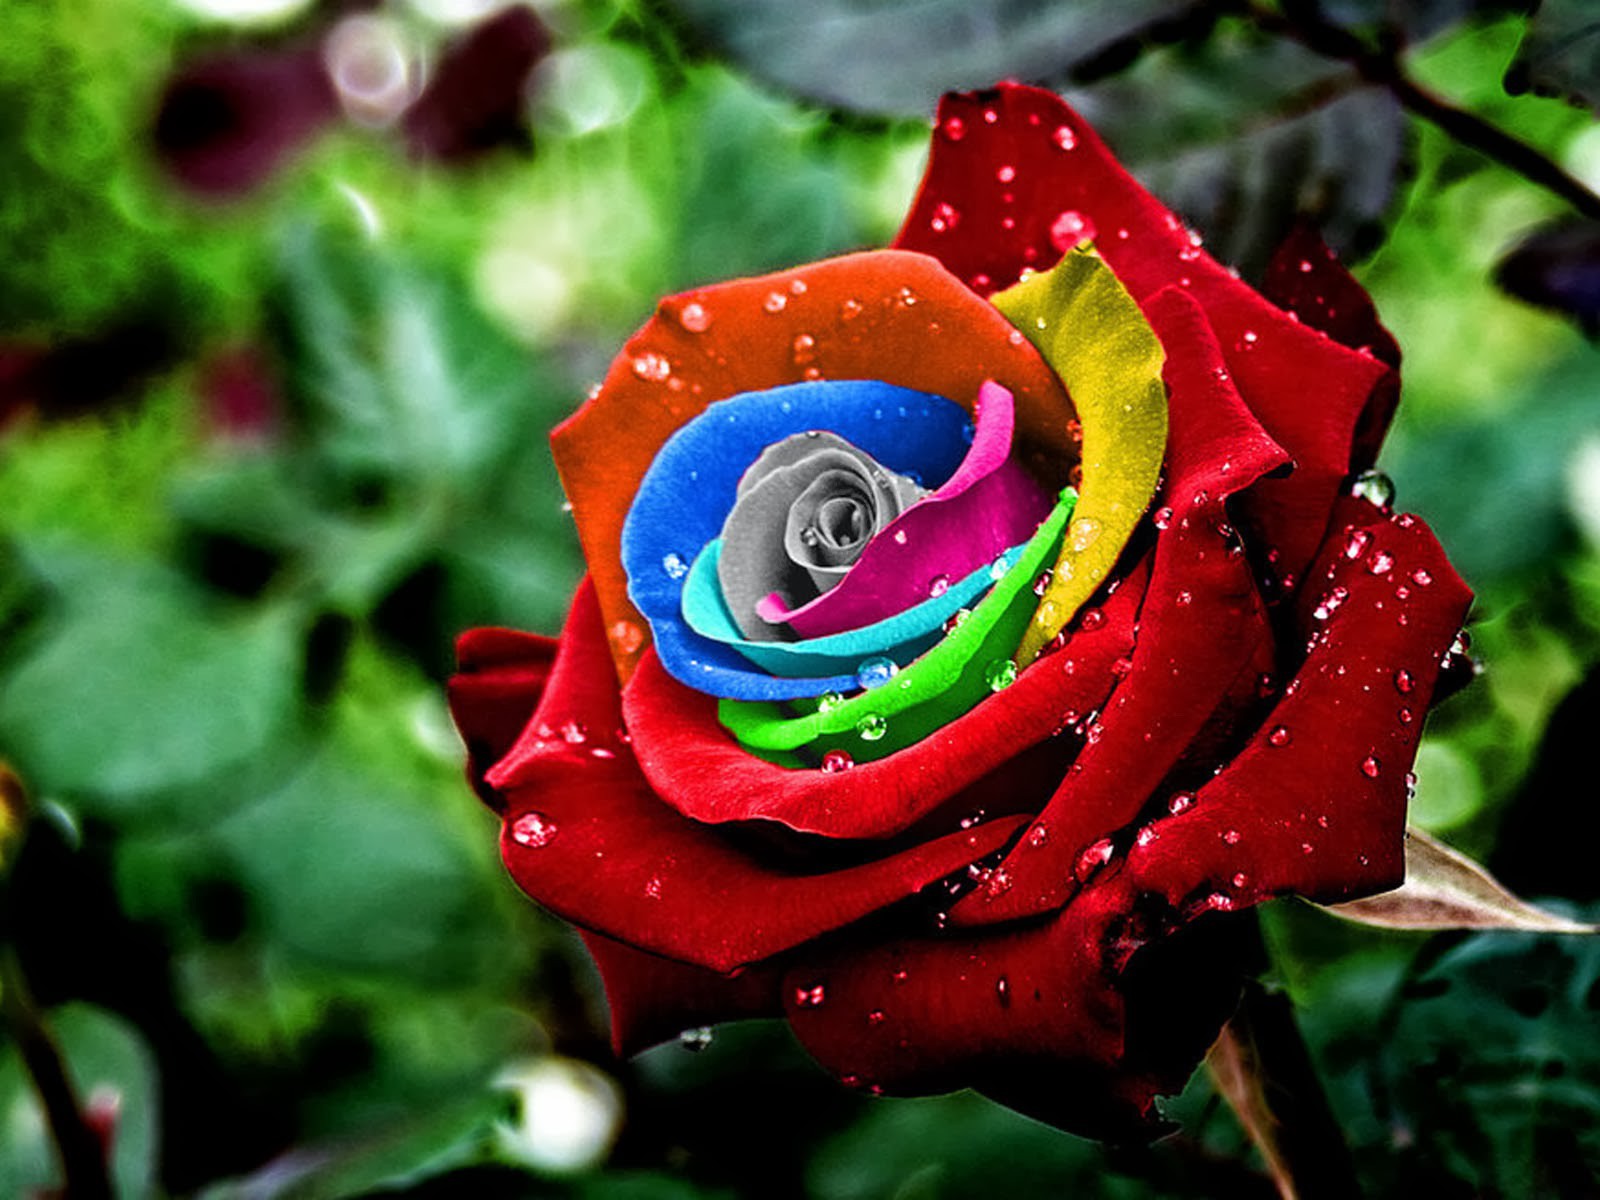 Colorful Roses Wallpapers